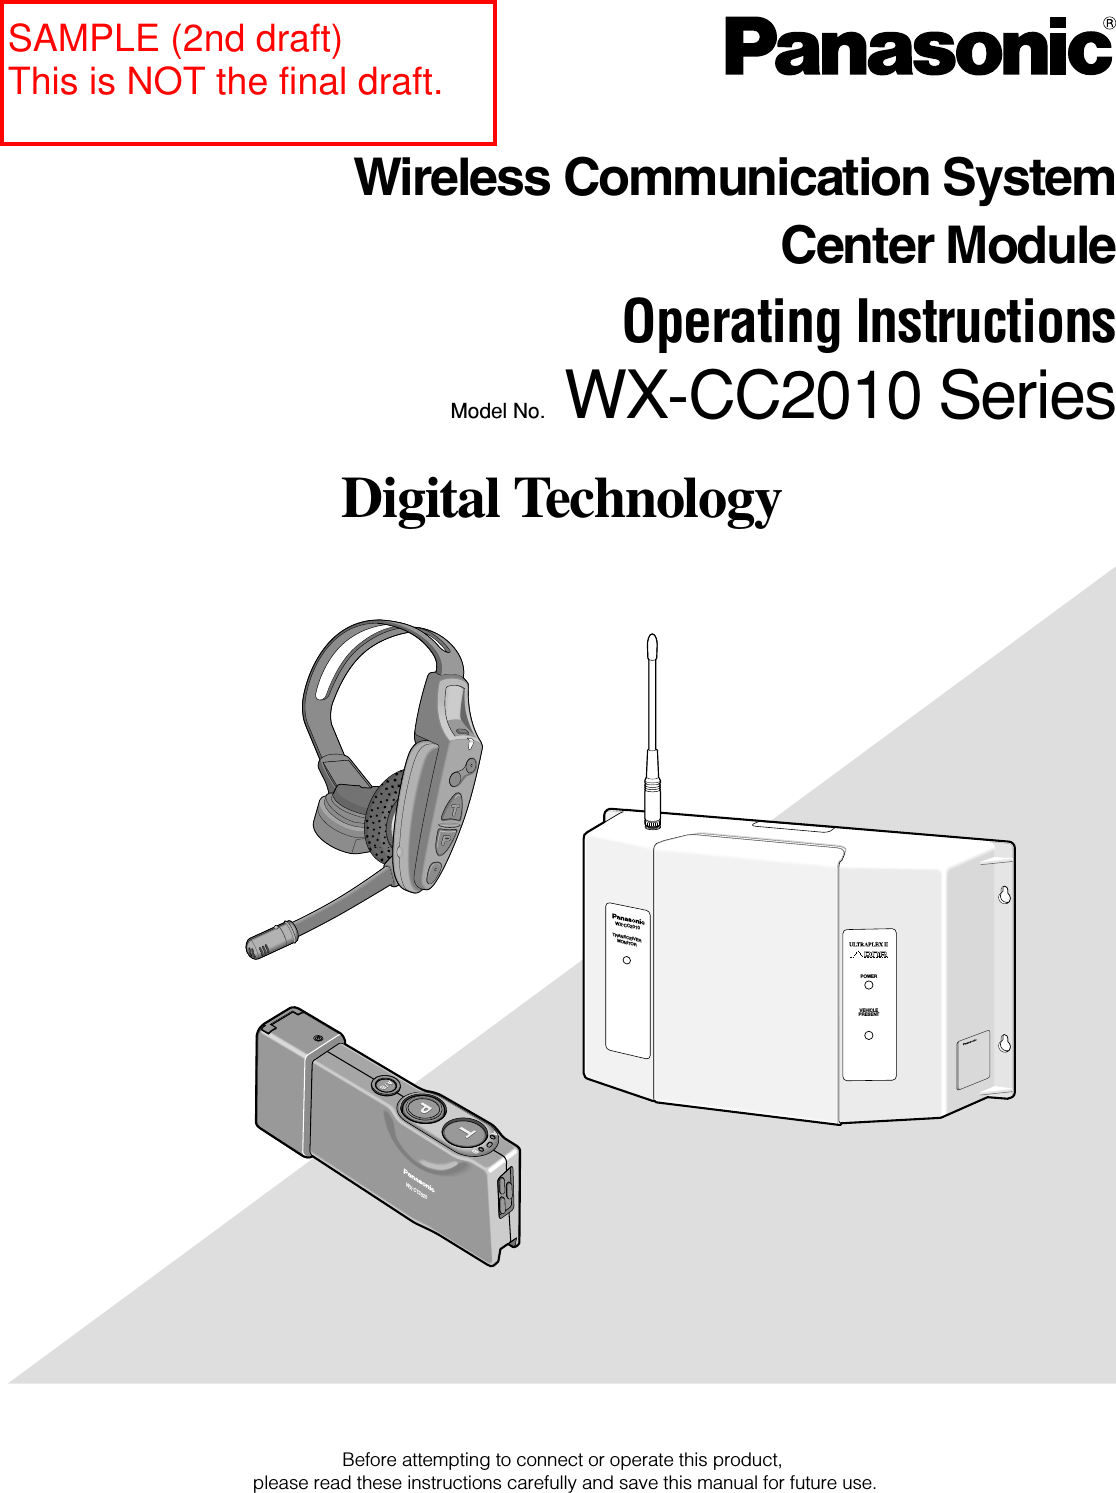 Before attempting to connect or operate this product,please read these instructions carefully and save this manual for future use.Digital TechnologyWX-CC2010TRANSCEIVERMONITORPOWERVEHICLEPRESENTABWX-CT2020Model No. WX-CC2010 SeriesWireless Communication SystemCenter ModuleOperating InstructionsSAMPLE (2nd draft)This is NOT the final draft.